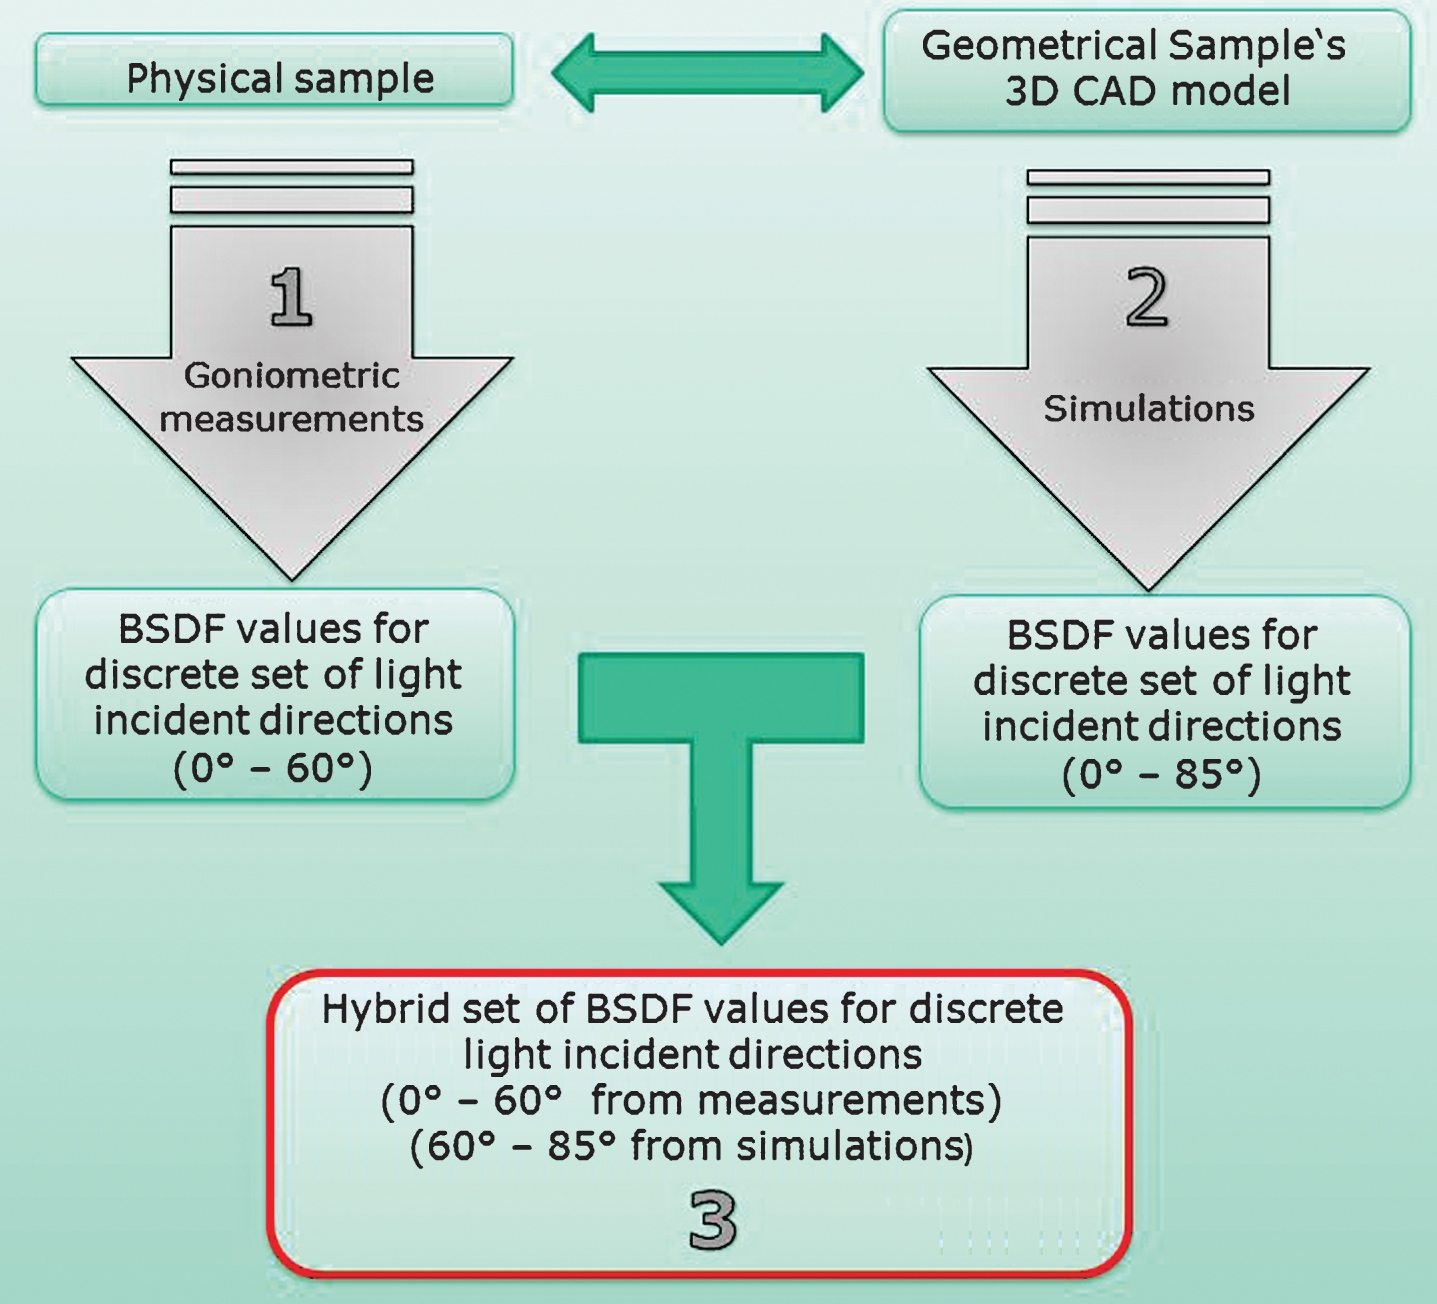 Combination of BSDF data from measurements and simulations into one hybrid set of data.